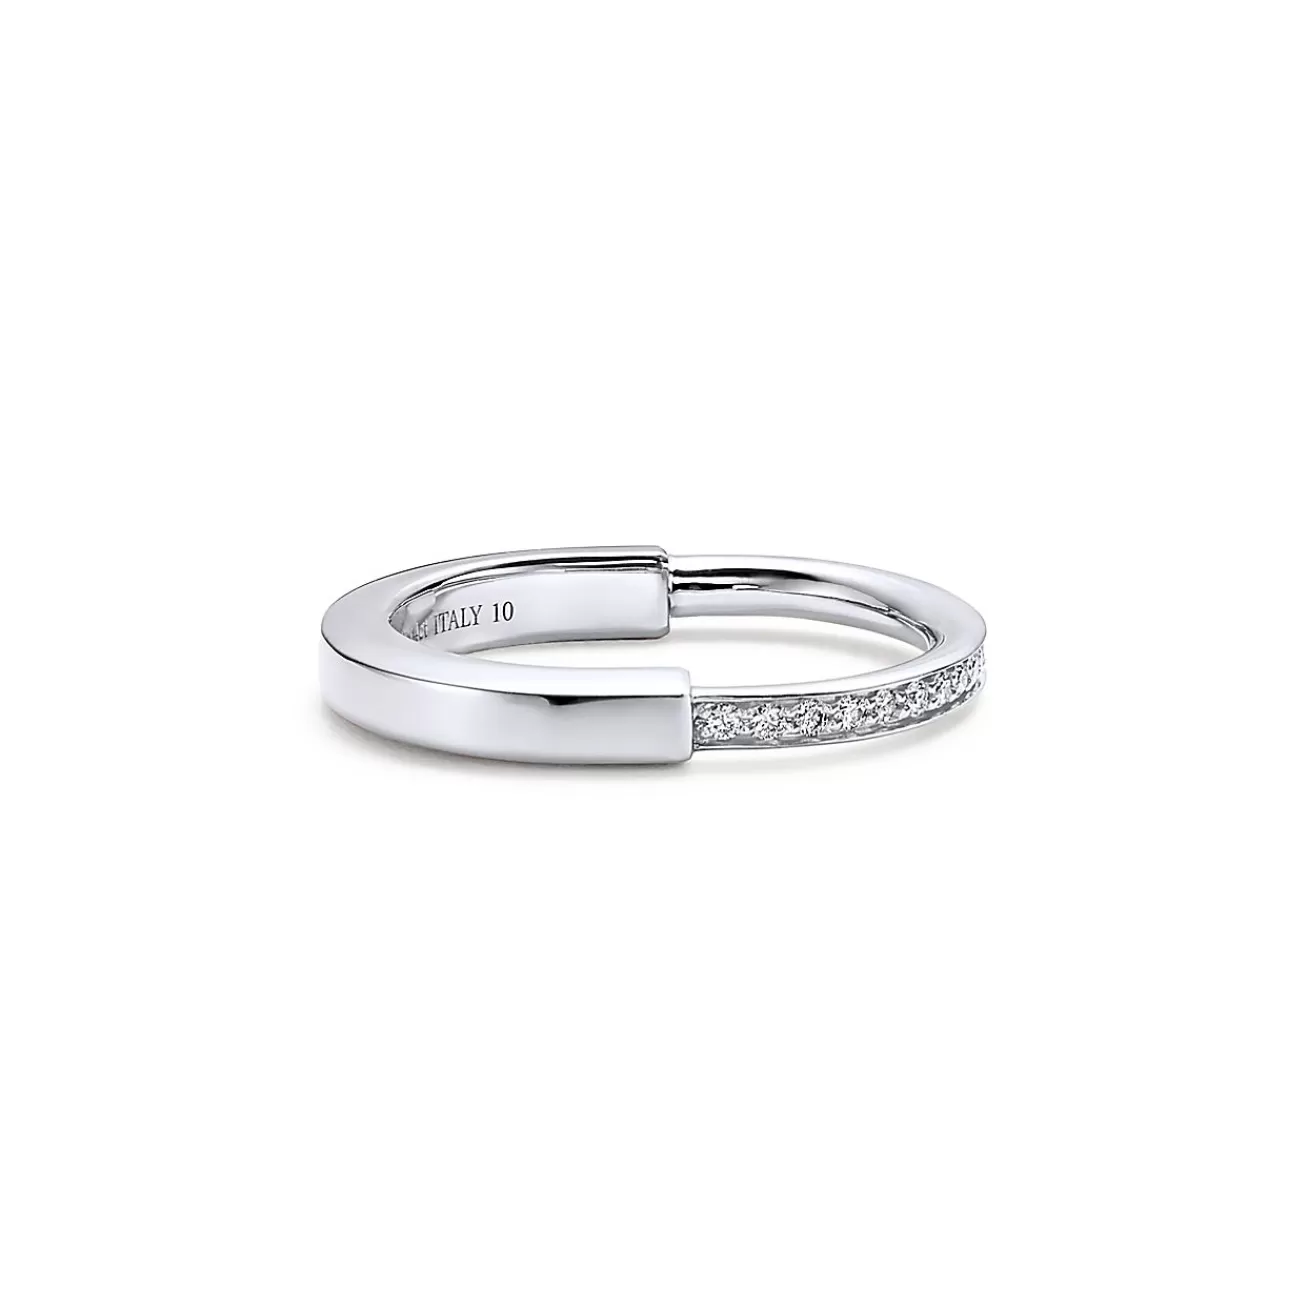 Tiffany & Co. Tiffany Lock Ring in White Gold with Diamonds | ^ Rings | Gifts for Her